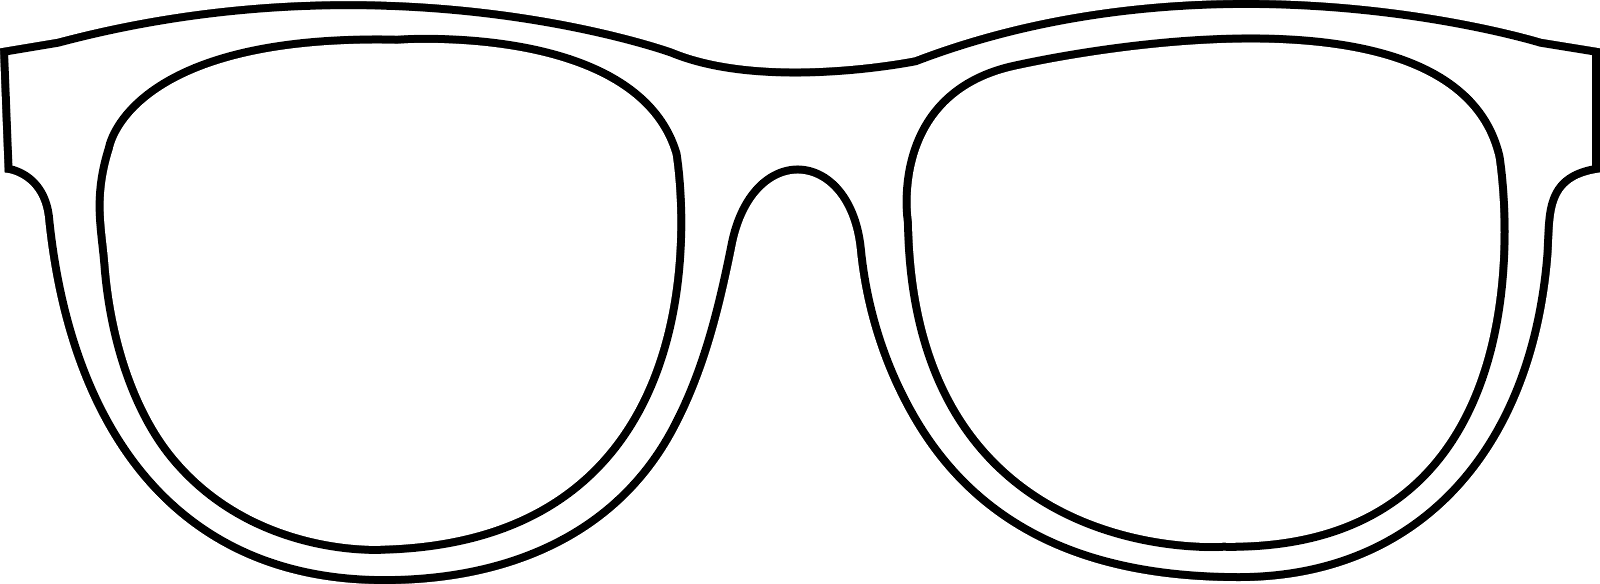 Black And White Clipart Of Pineapple Good Vibes With - Black And White Sunglasses Clip Art - Png Download (1600x584), Png Download